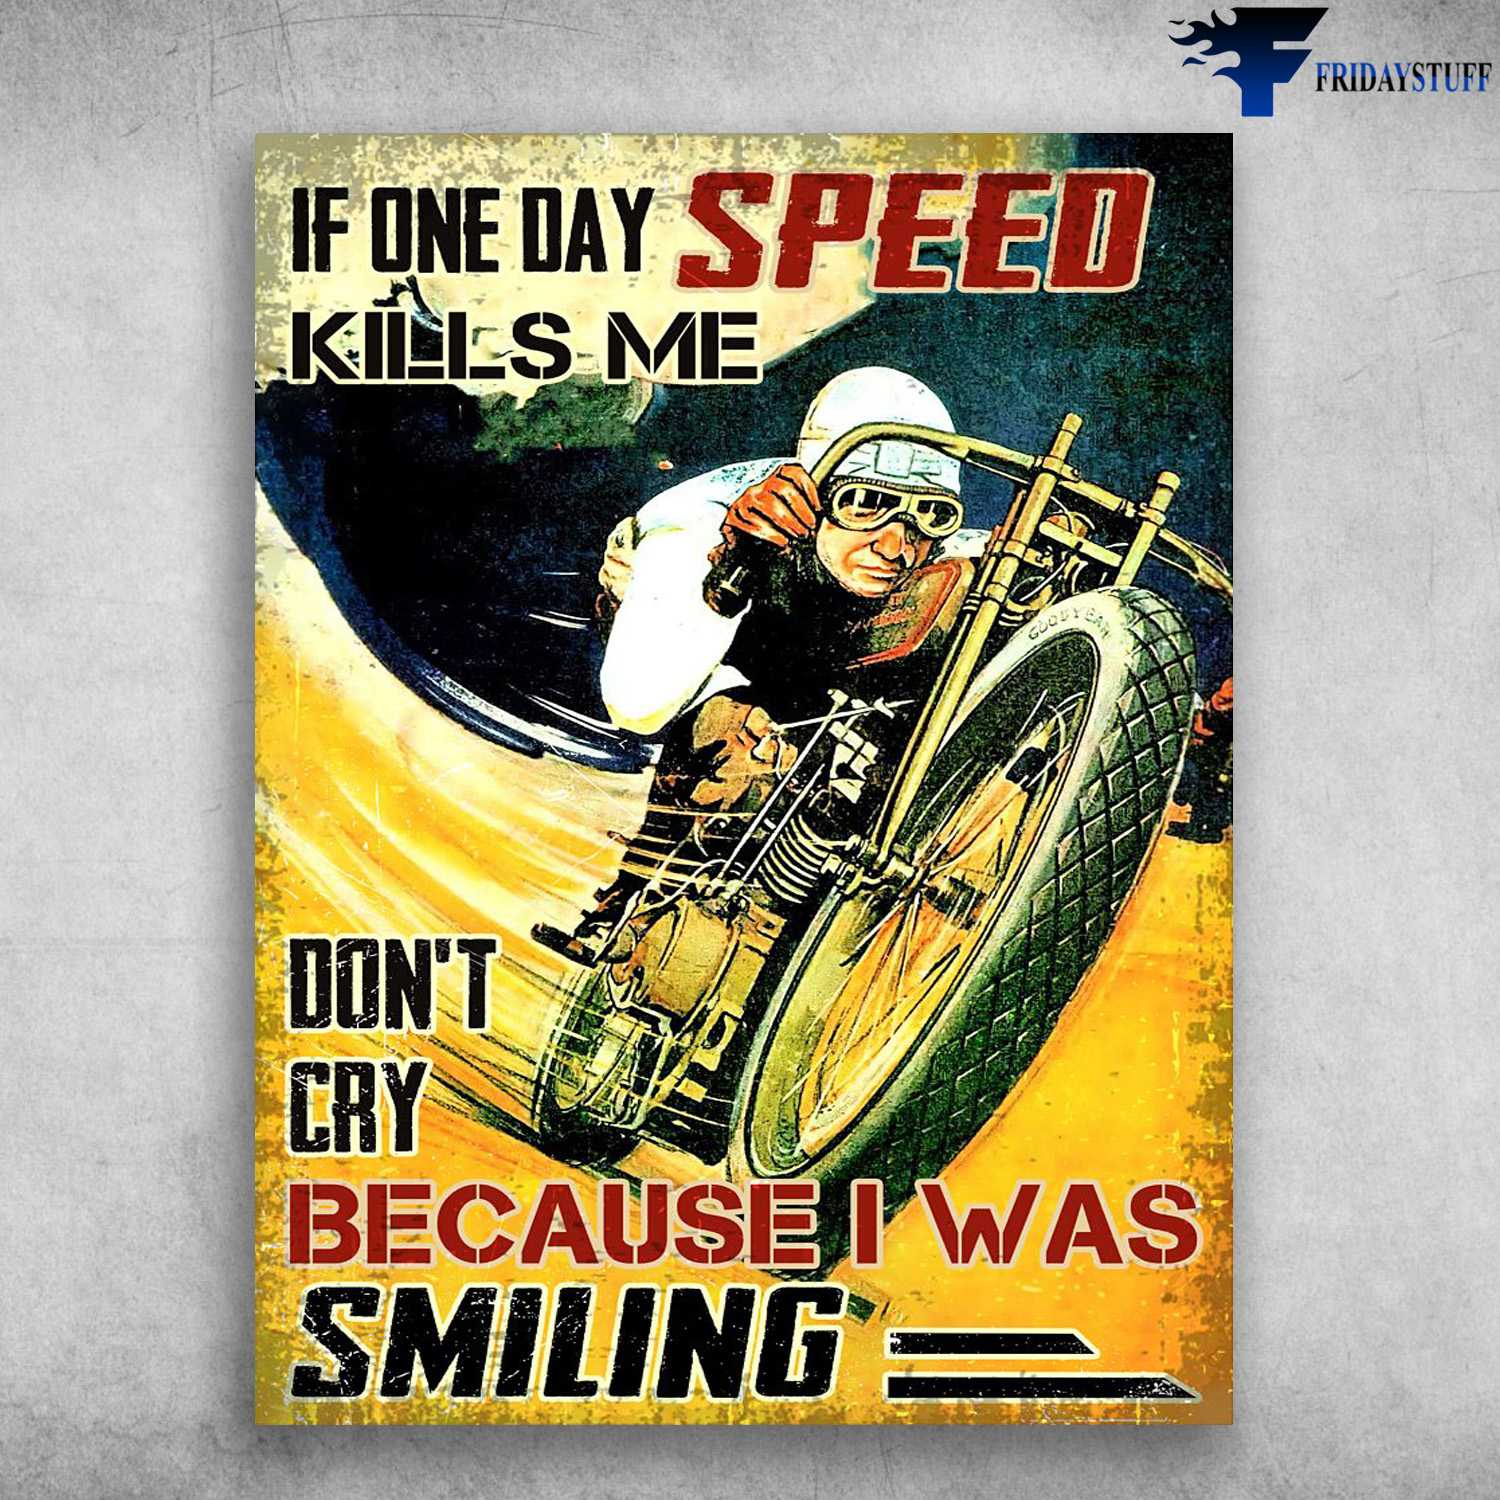 Motorcycle Lover, Biker Poster - If One Day Speed, Kill Me, Don't Cry Because I Was Smiling